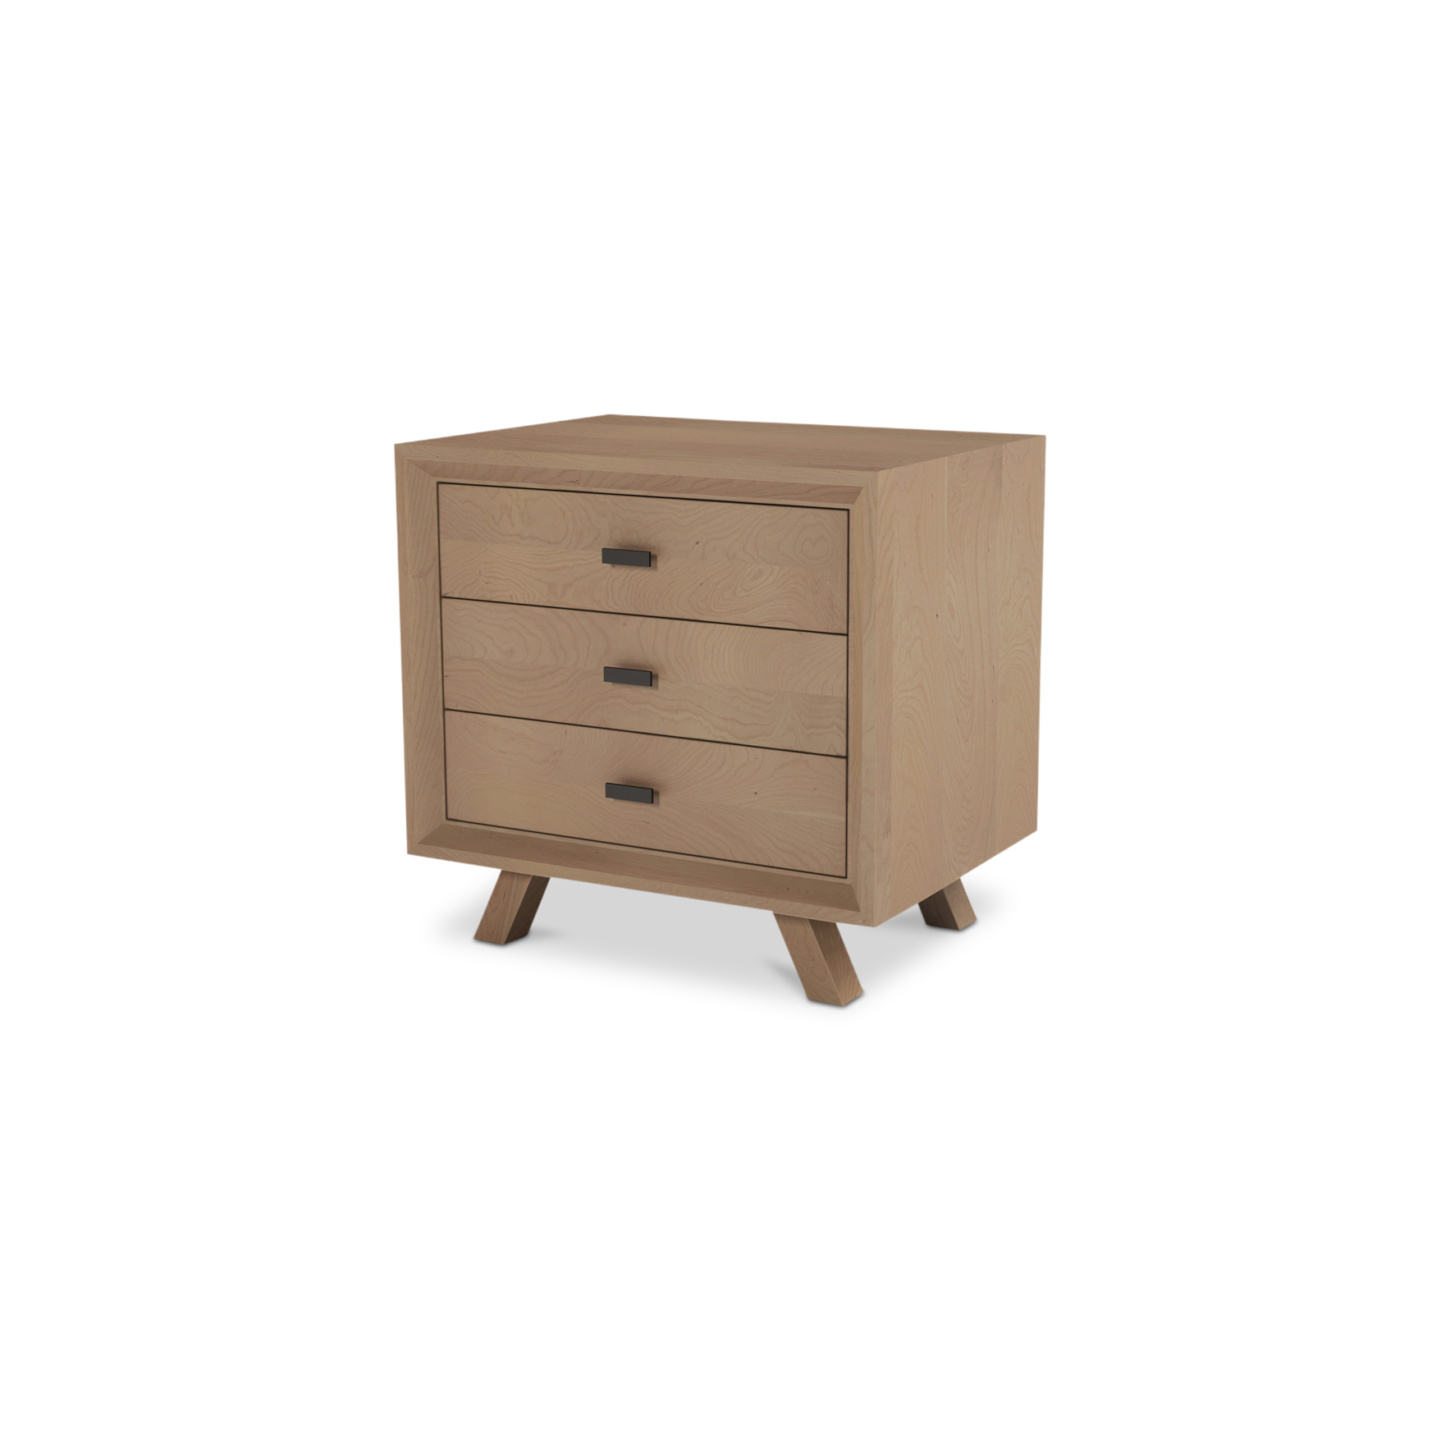 American made cherry wood bedside table